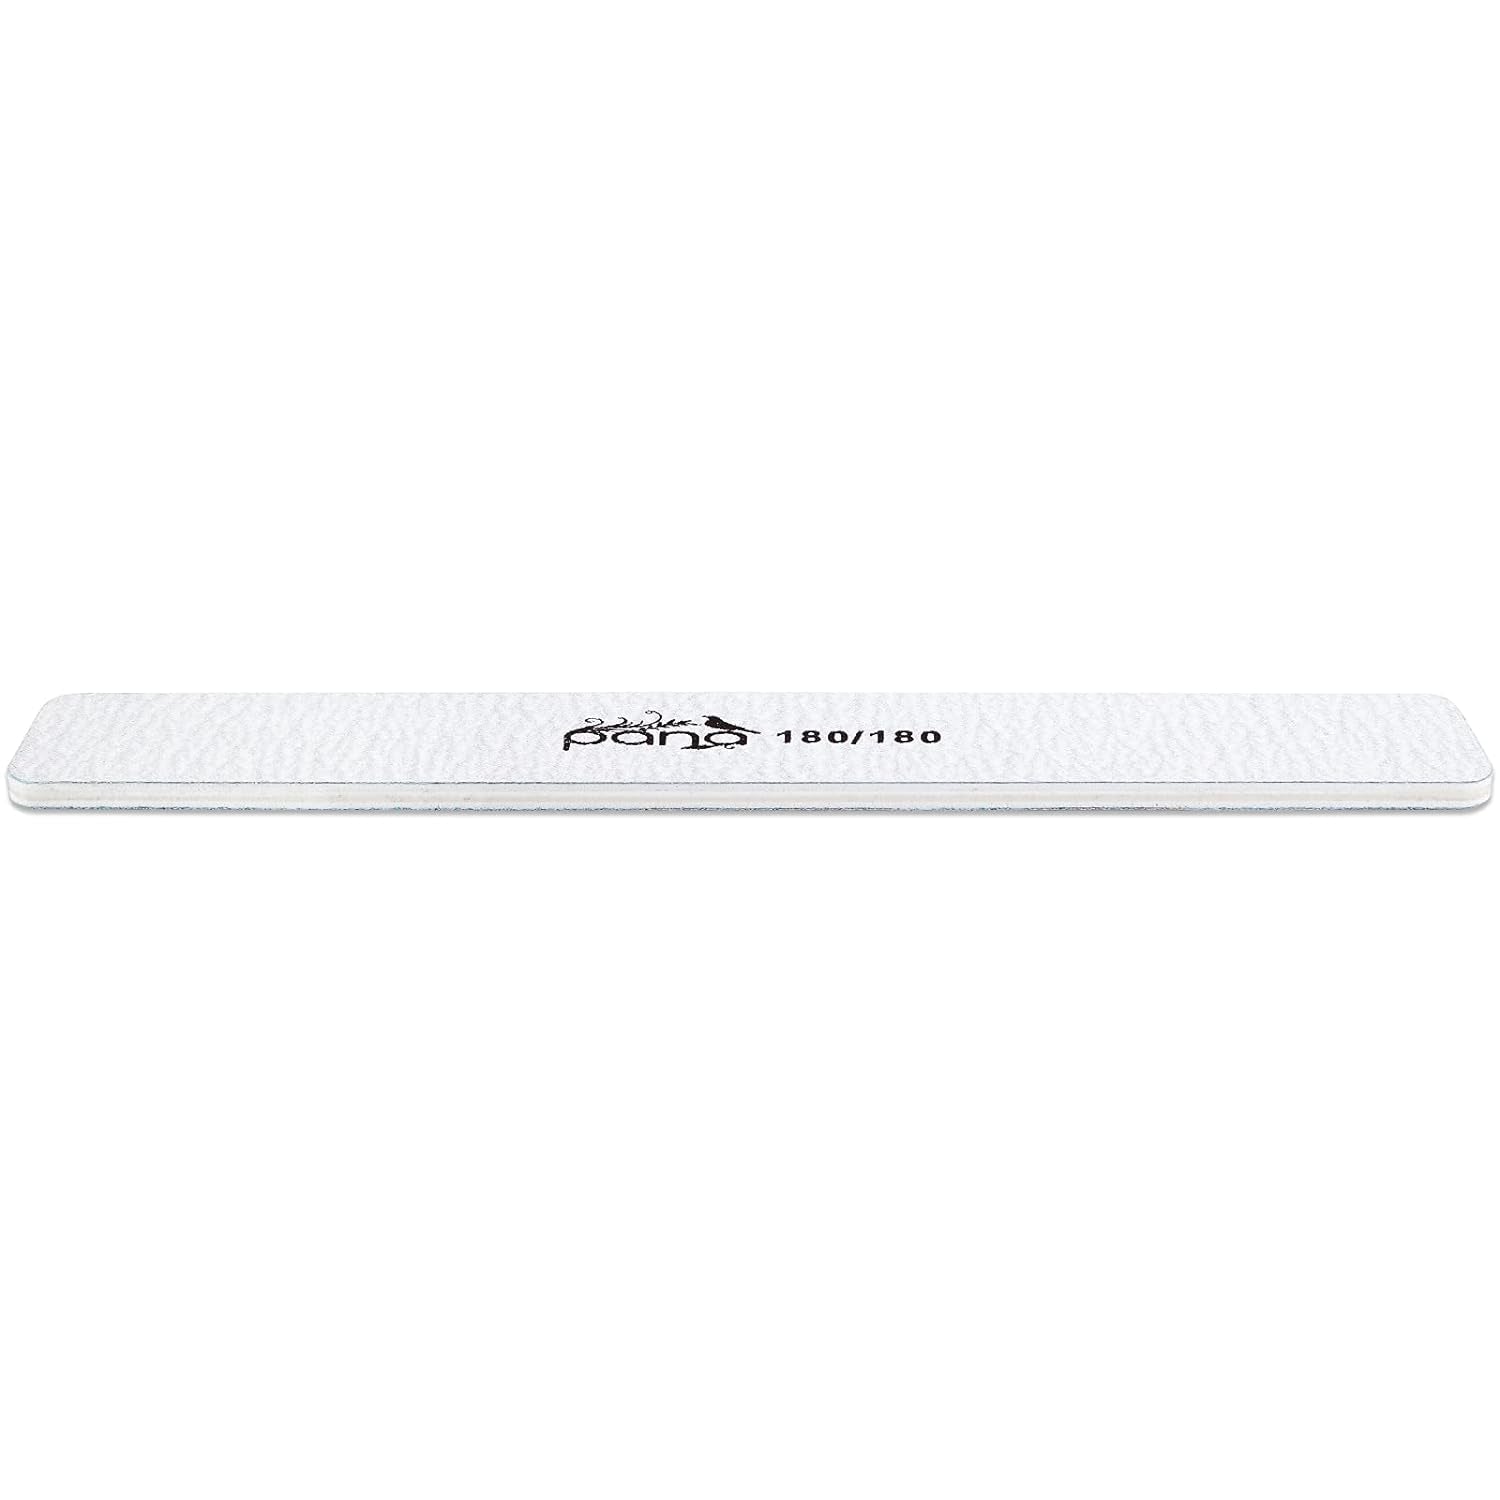 10Pcs -  Jumbo Double-Sided Emery Nail File for Manicure, Pedicure, Natural, and Acrylic Nails - Zebra (Grit 180/180)